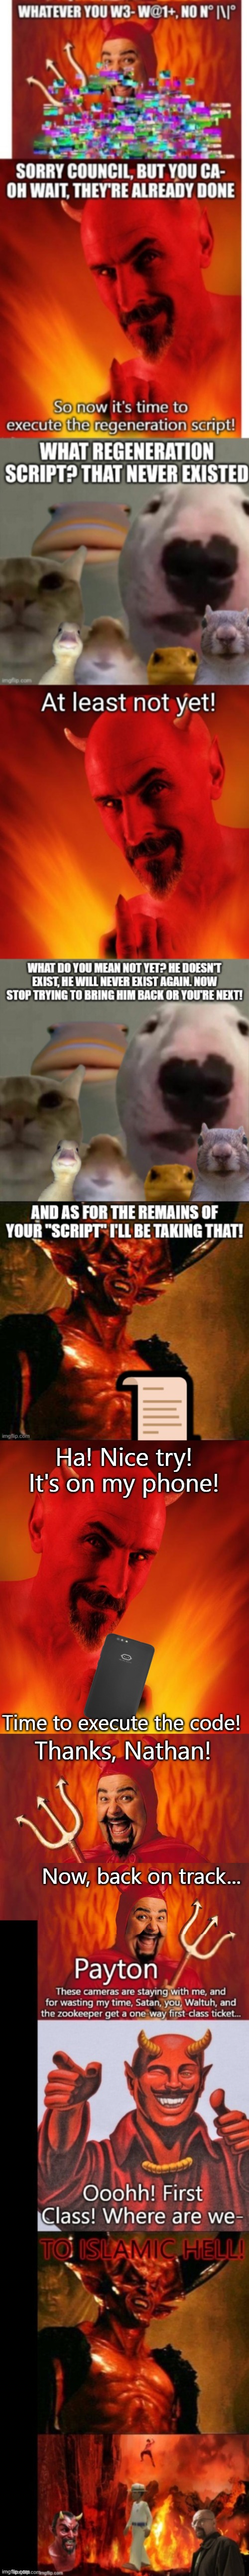 Revisiting Payton | Ha! Nice try! It's on my phone! Time to execute the code! Thanks, Nathan! Now, back on track... | image tagged in satan,funny satan | made w/ Imgflip meme maker